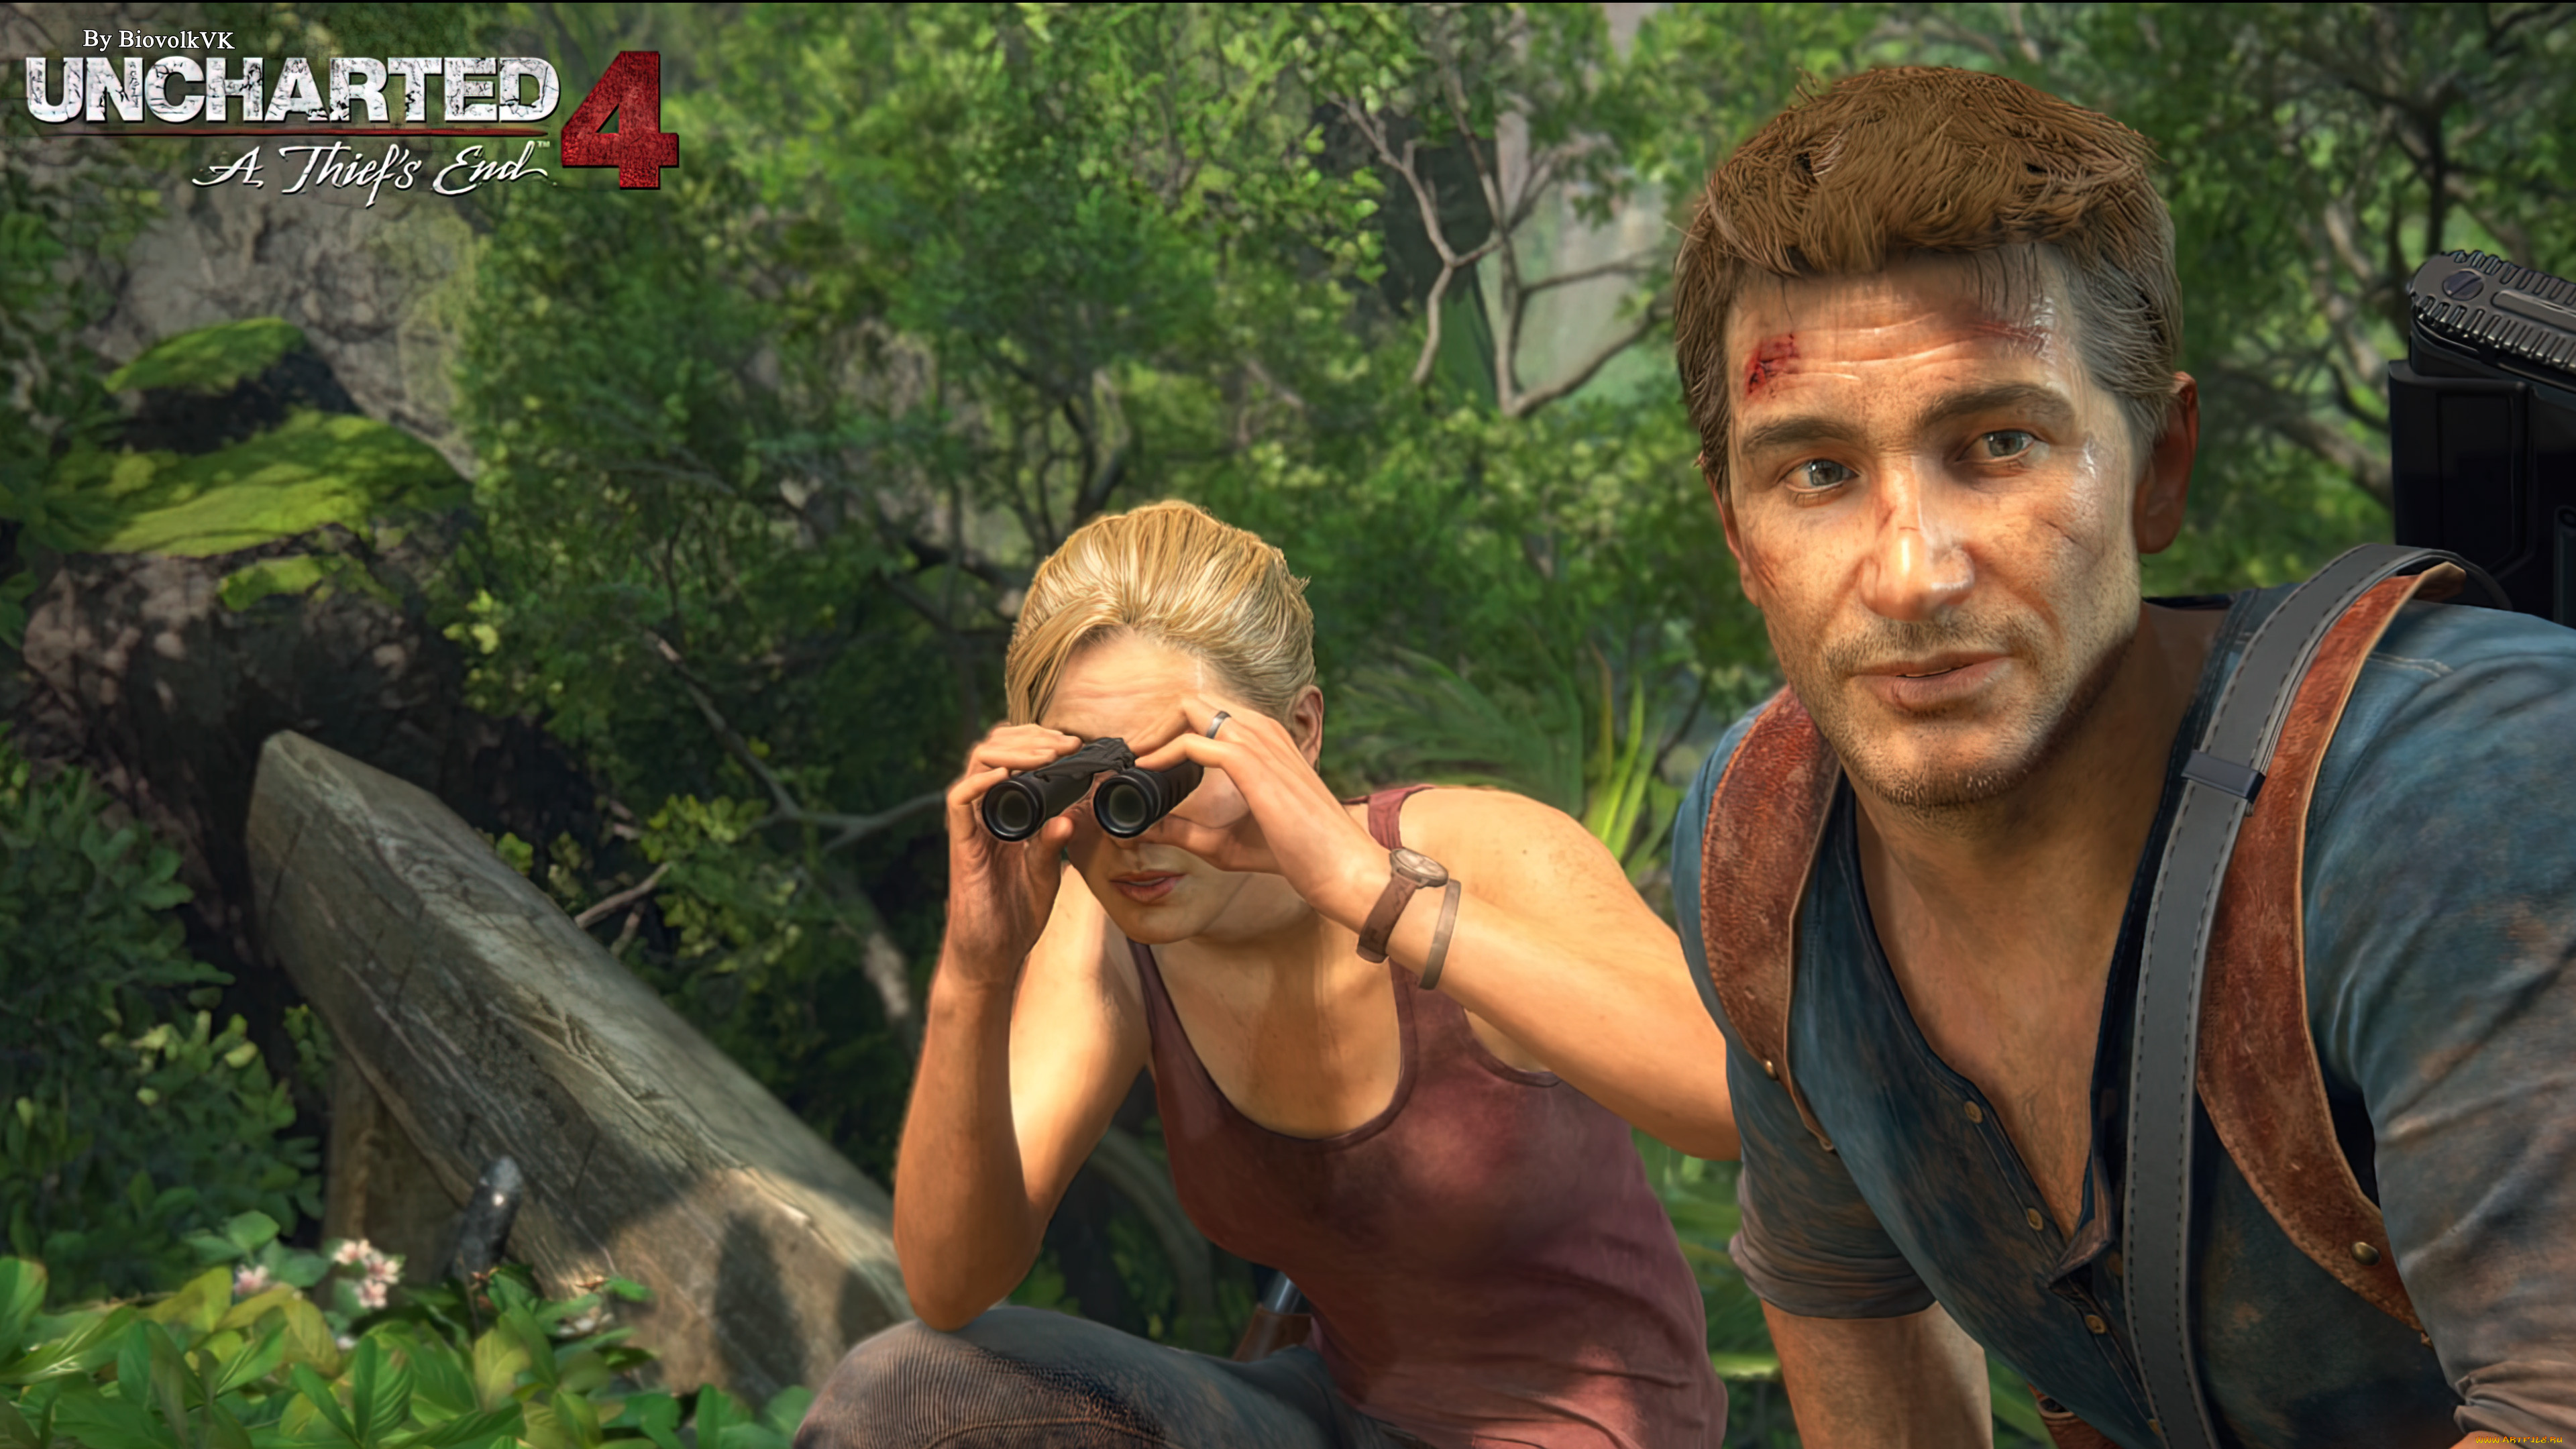 uncharted 4,   ,  ,  a thief`s end, uncharted, 4, , , biovolkvk